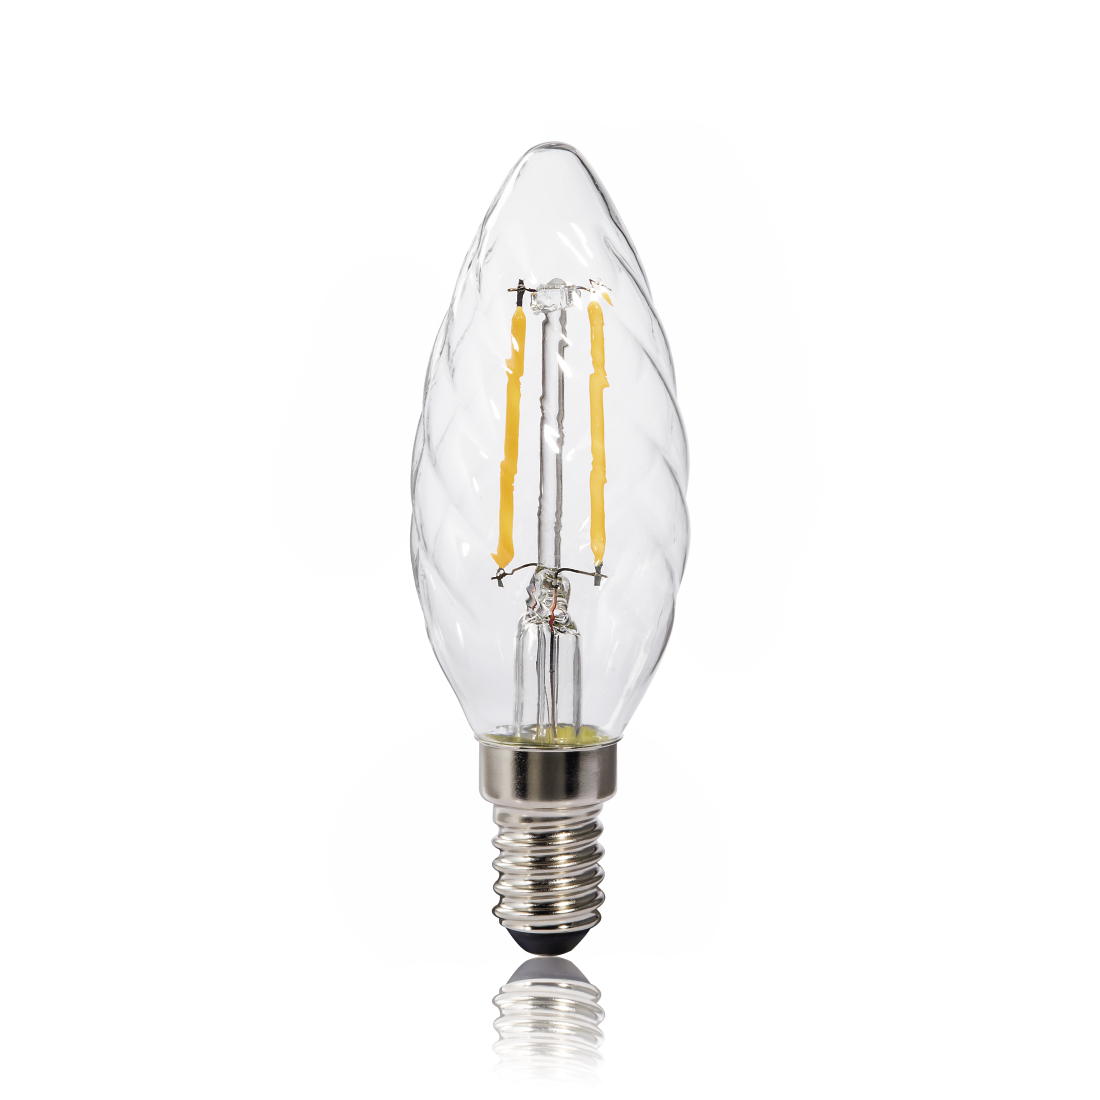 abx2 High-Res Image 2 - Xavax, LED Filament, E14, 250 lm Replaces 25 W, Candle Bulb, warm white